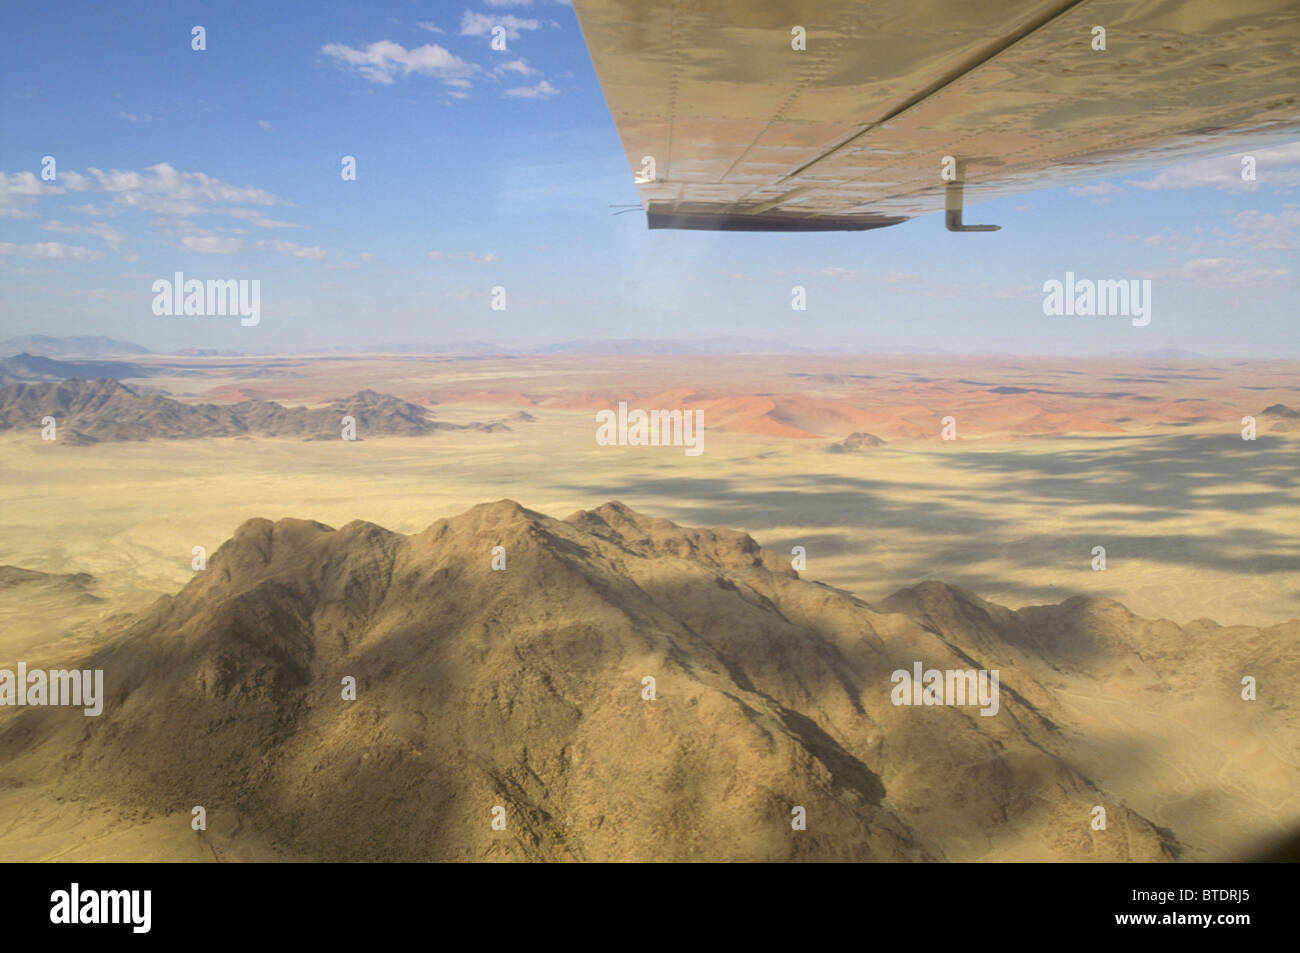 Aerial view of a mountainous desert area in Damaraland from an aeroplane Stock Photo